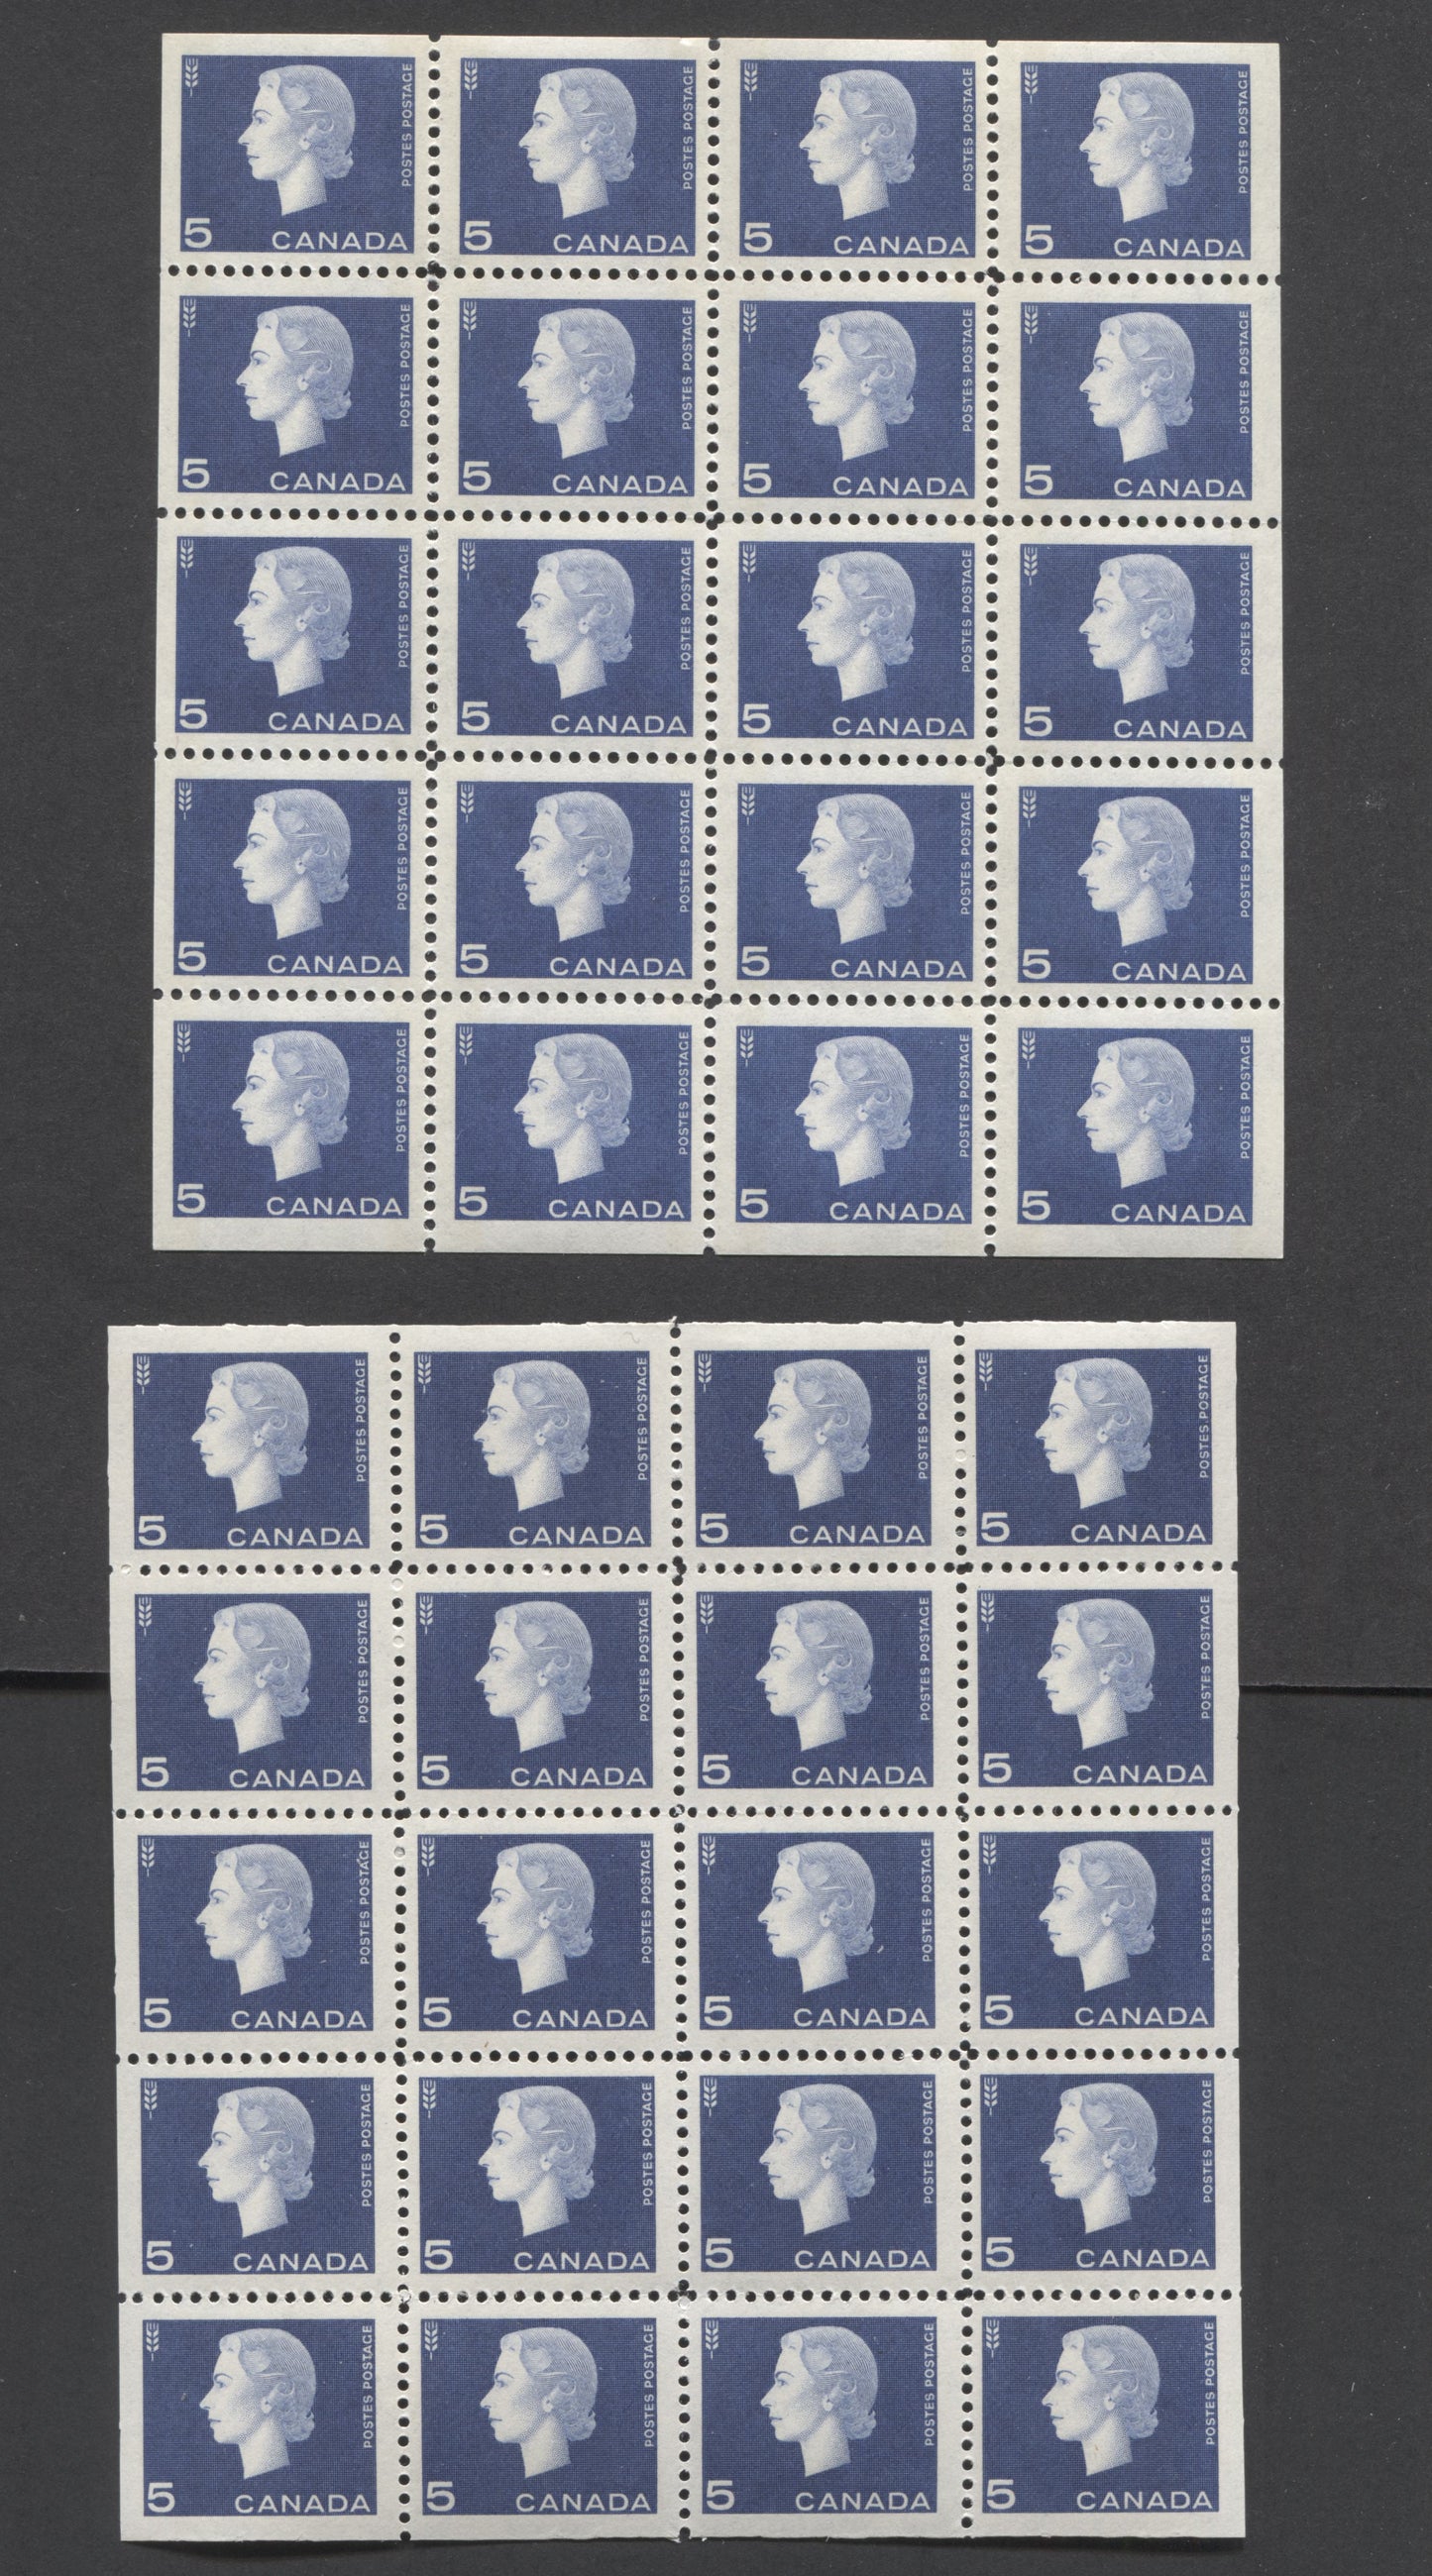 Lot 216 Canada #405b,q 5c Violet Blue Agriculture, 1962-1963 Cameo Issue, 2 VFNH Tagged & Untagged Cello Paper Panes Of 25 Untagged Pane Is Lightly Folded In One Direction, Tagged Pane Has Plae Bluish White Tagging Under Shortwave UV